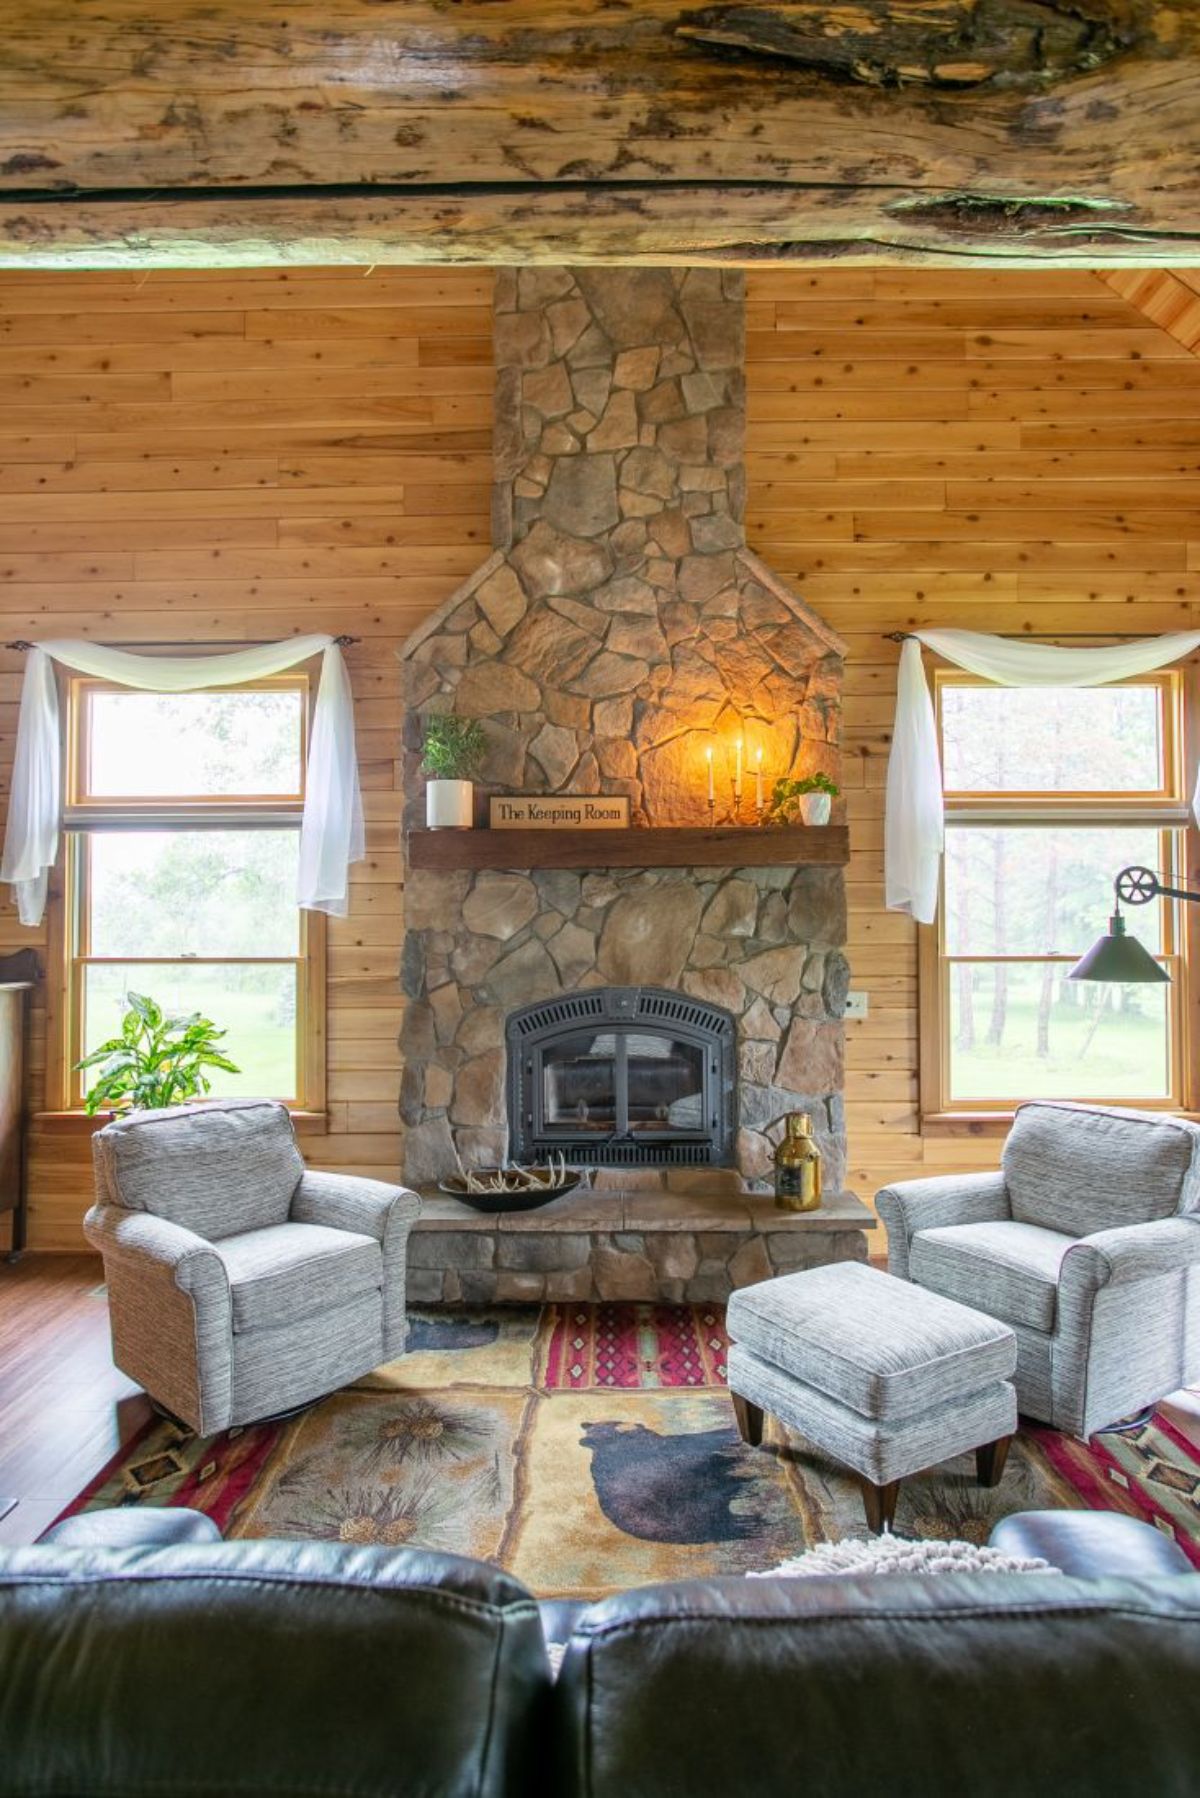 stone fireplace against log cabin wall with windows on both sides